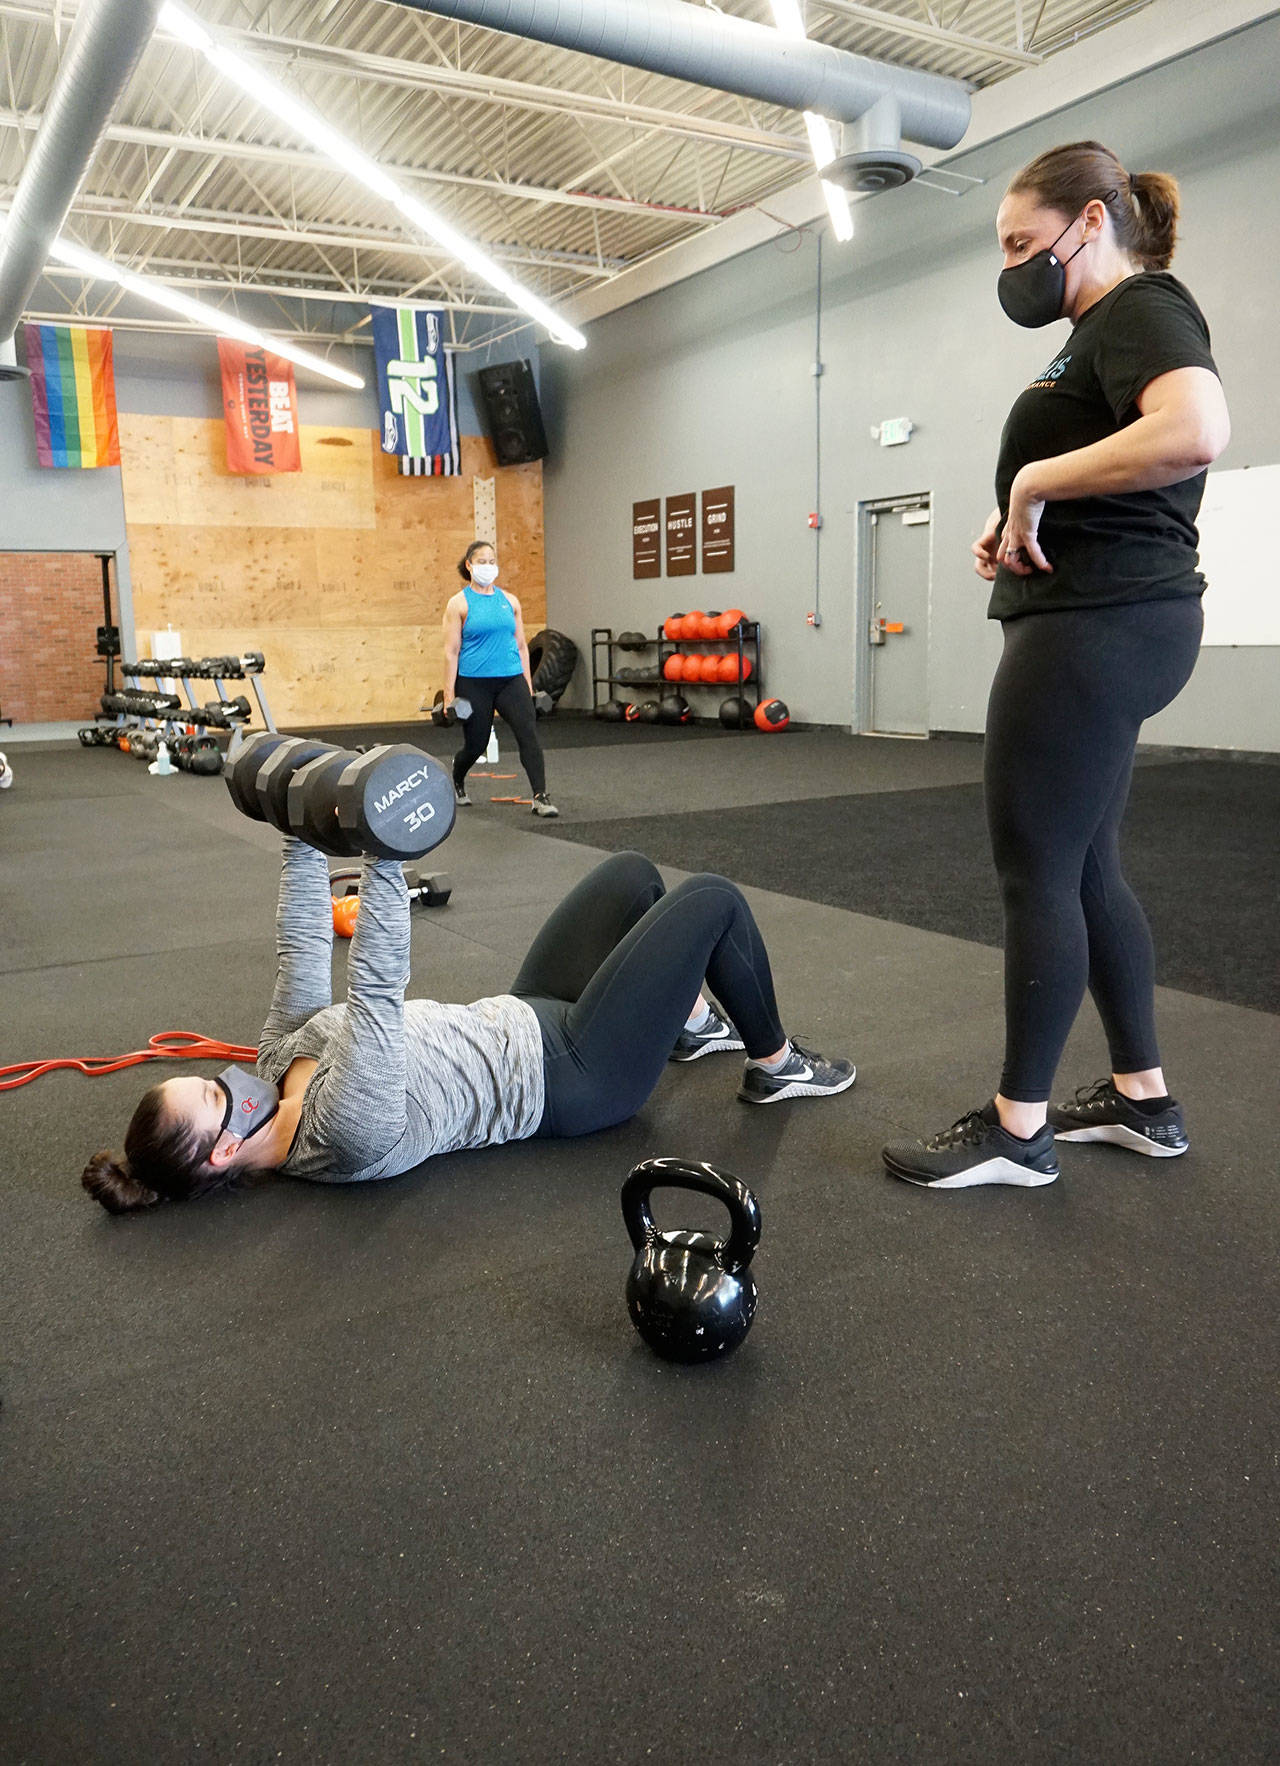 Annapolis Fitness and Performance lost approximately 40 percent of its members during the most recent COVID-19 pandemic shutdown. (Mike De Felice | Kitsap Daily News)